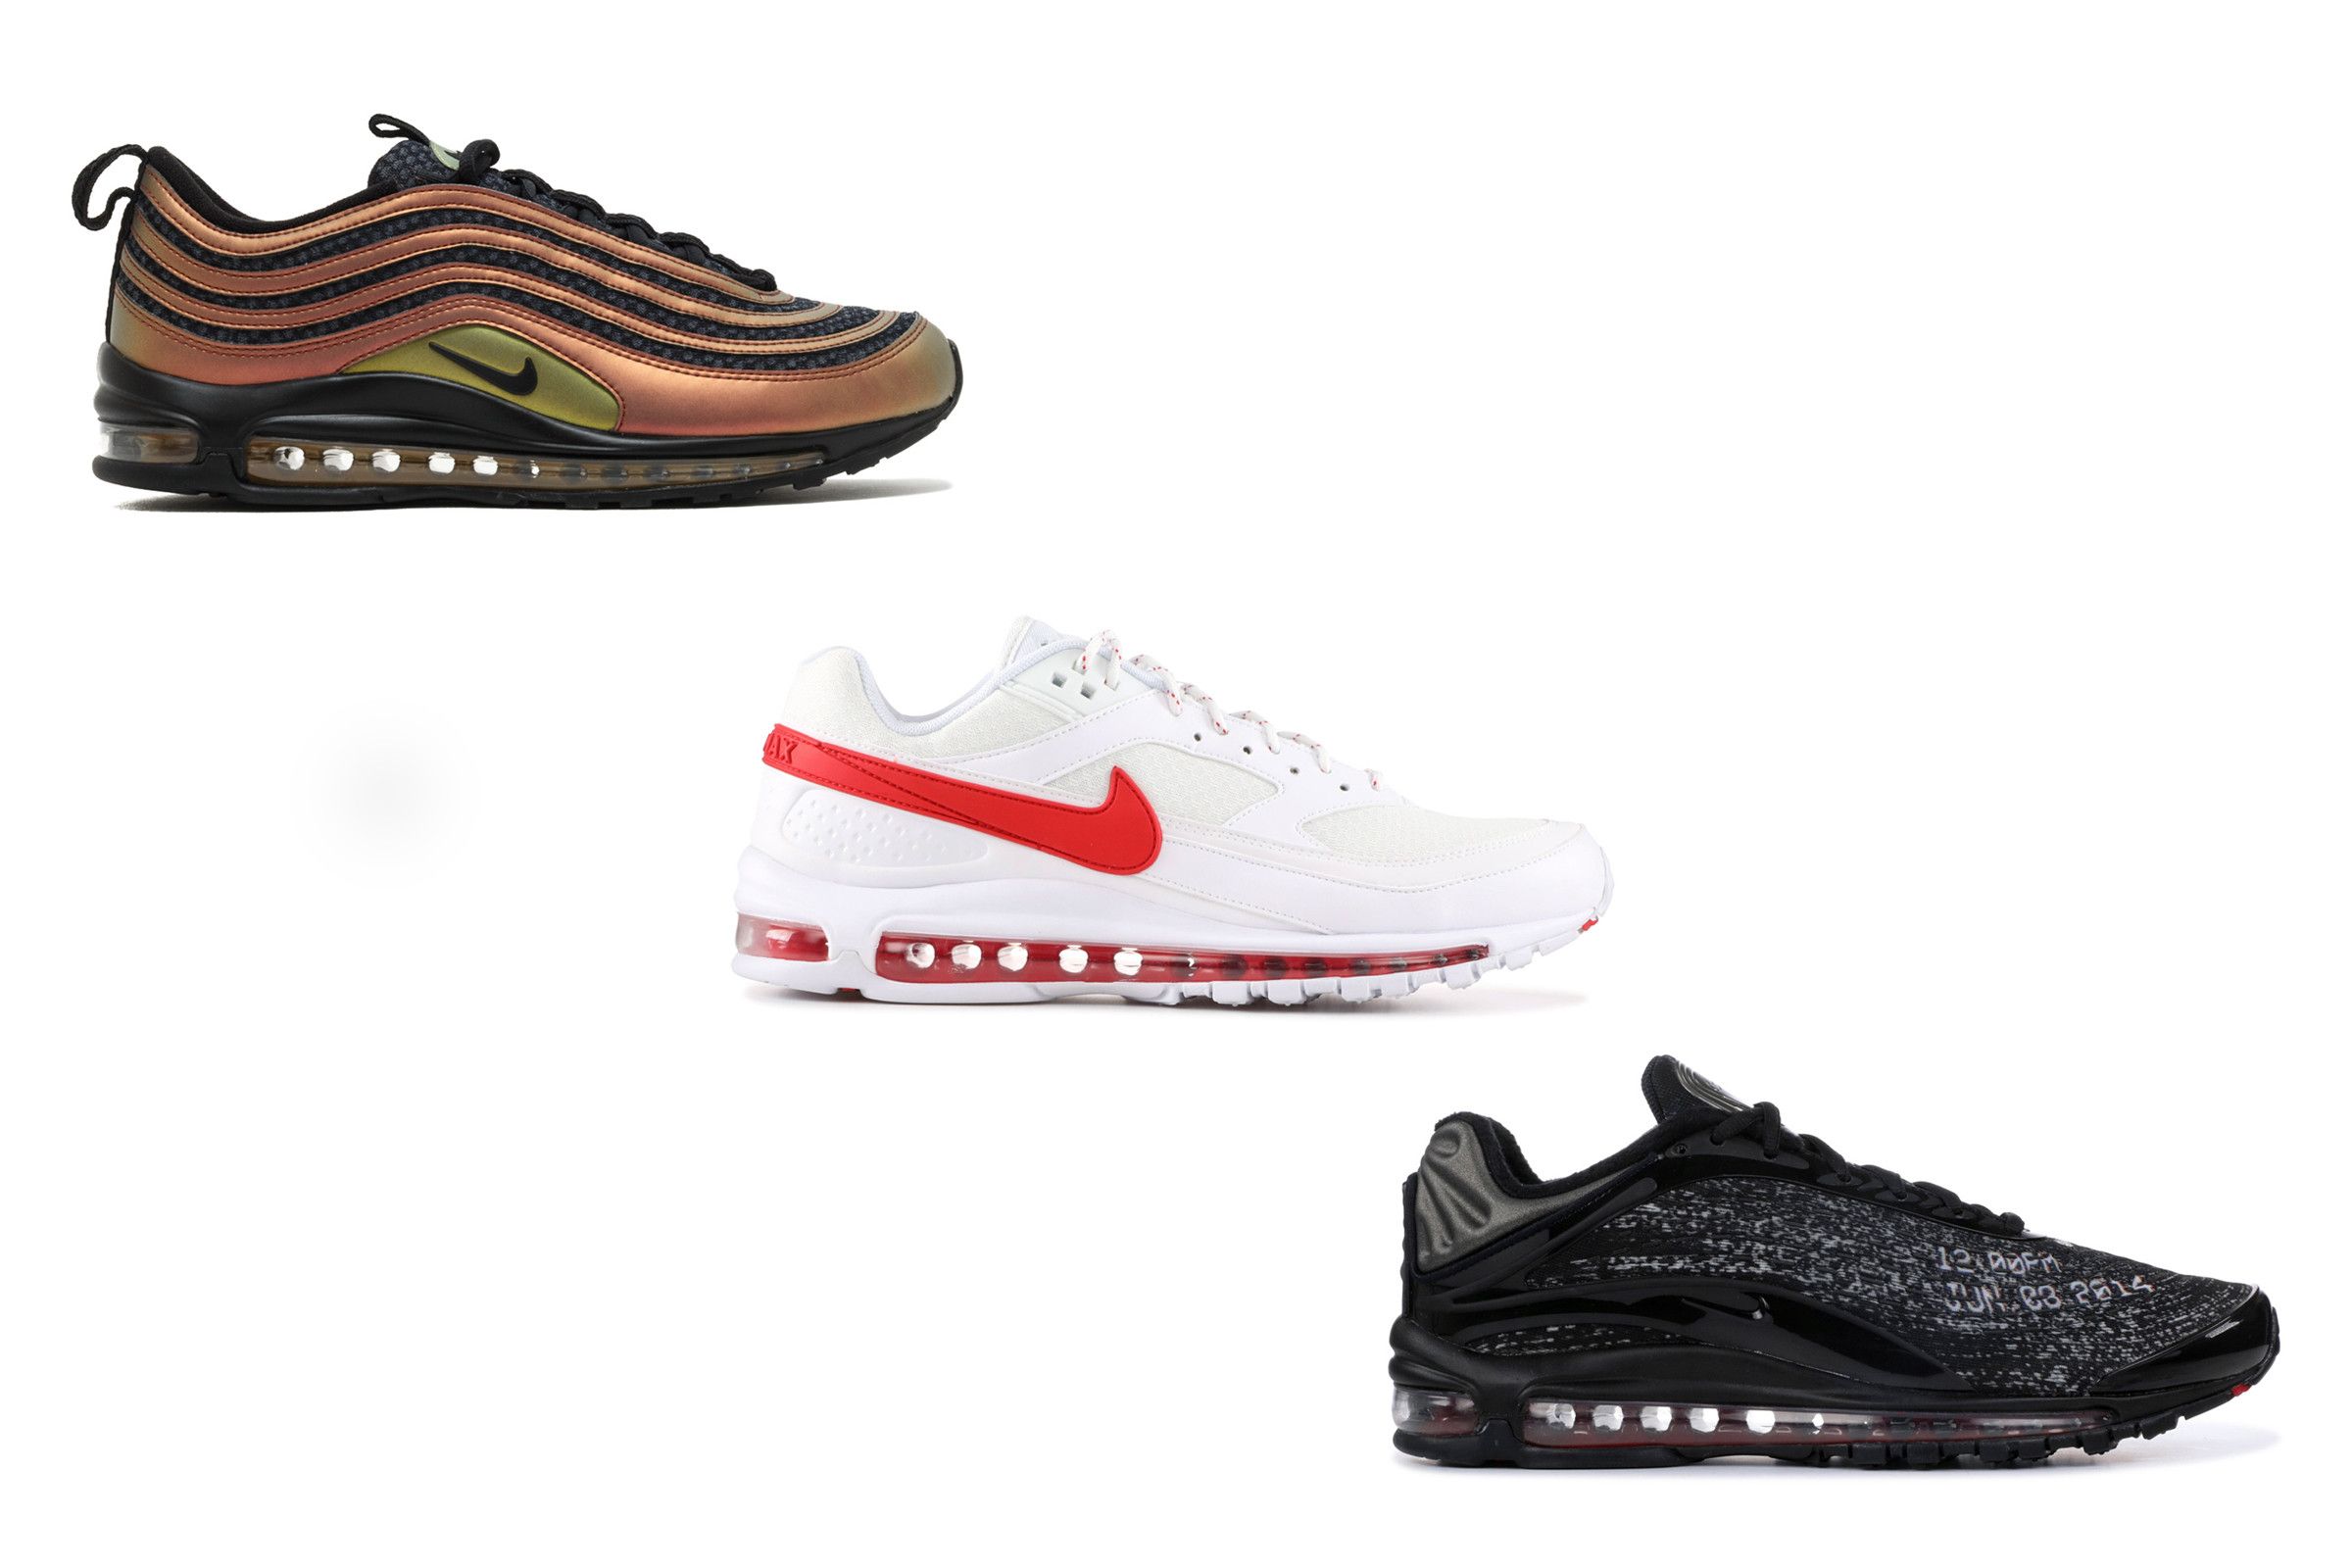 Skepta's Nike collaboration sneakers: The Air Max 97 Sk (top left), Air Max 97/BW (center) and Air Max Deluxe.